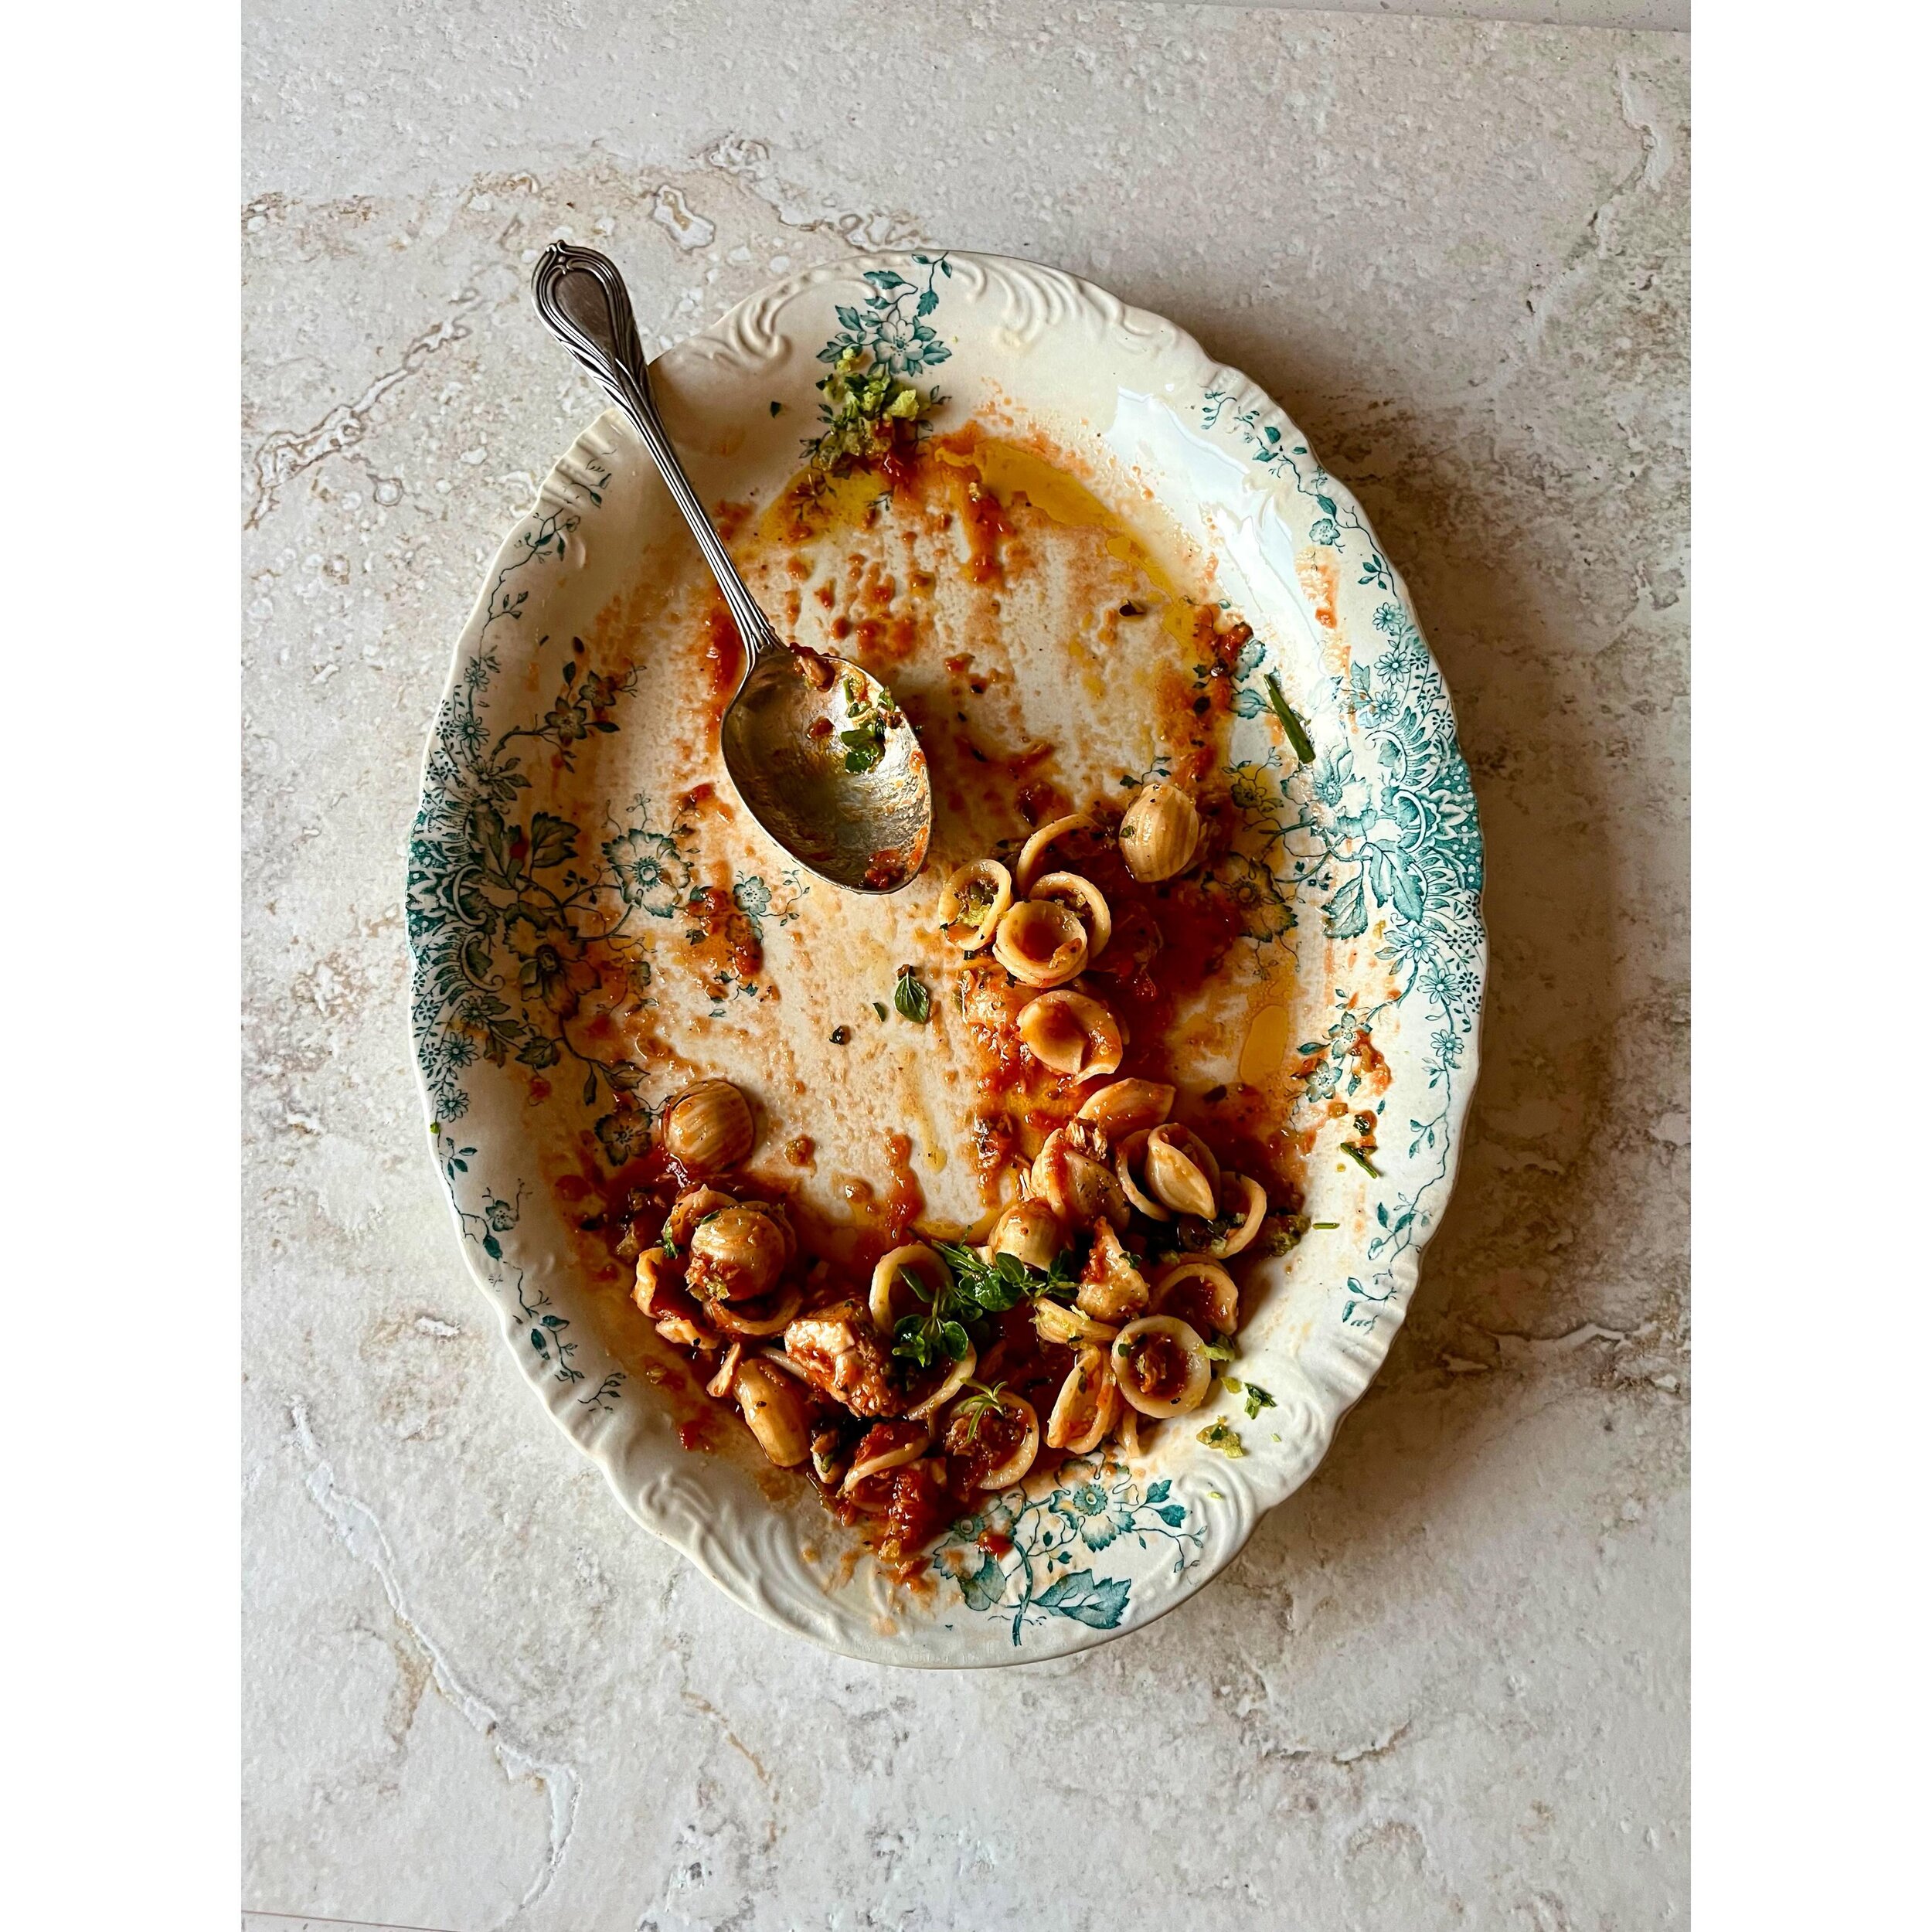 Finished.
Orecchiette with tuna, tomato, caper and basil sauce. 
Parsley and garlic breadcrumbs. 
That was good. 
.
.
.
.
.
#pasta #tuna #italian #theartofplating #theartofslowliving #sauce #beautifulcuisines #foodphotographyandstyling #tracywoodfood